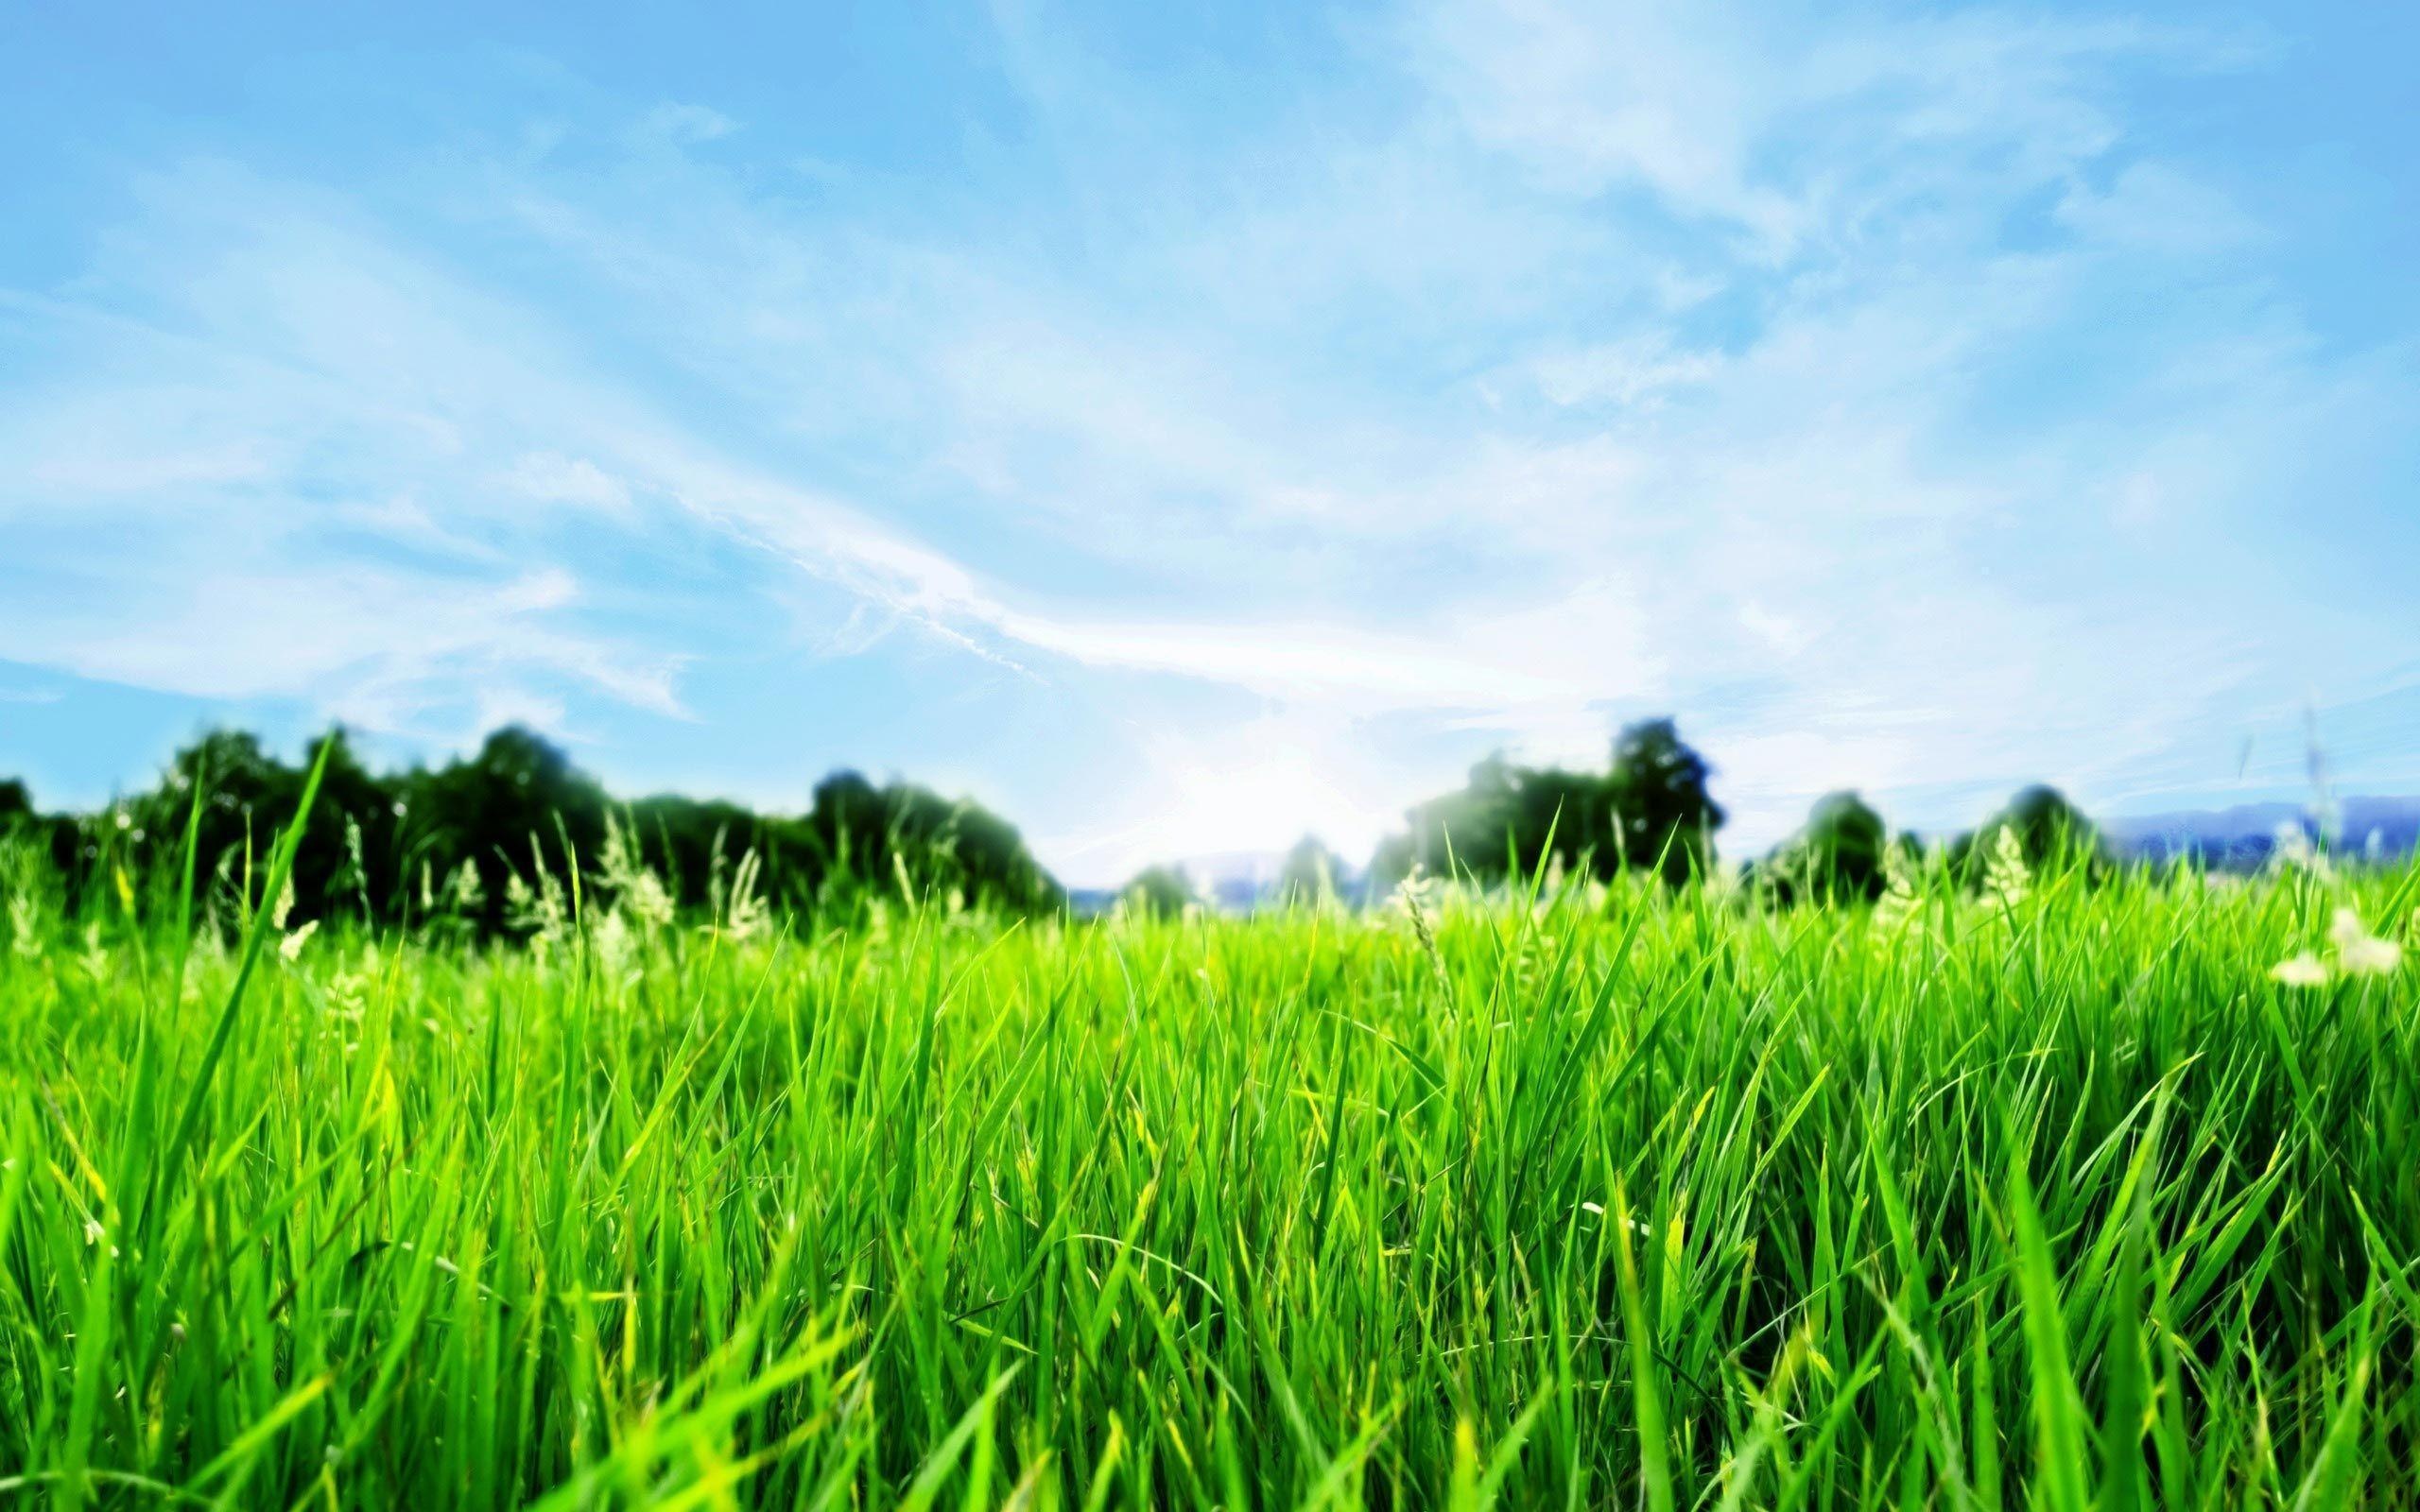 Grass and Sky: Green, Emptiness, Outskirts, Bush country, Isolated place, Unspoiled area, Sprouts. 2560x1600 HD Wallpaper.